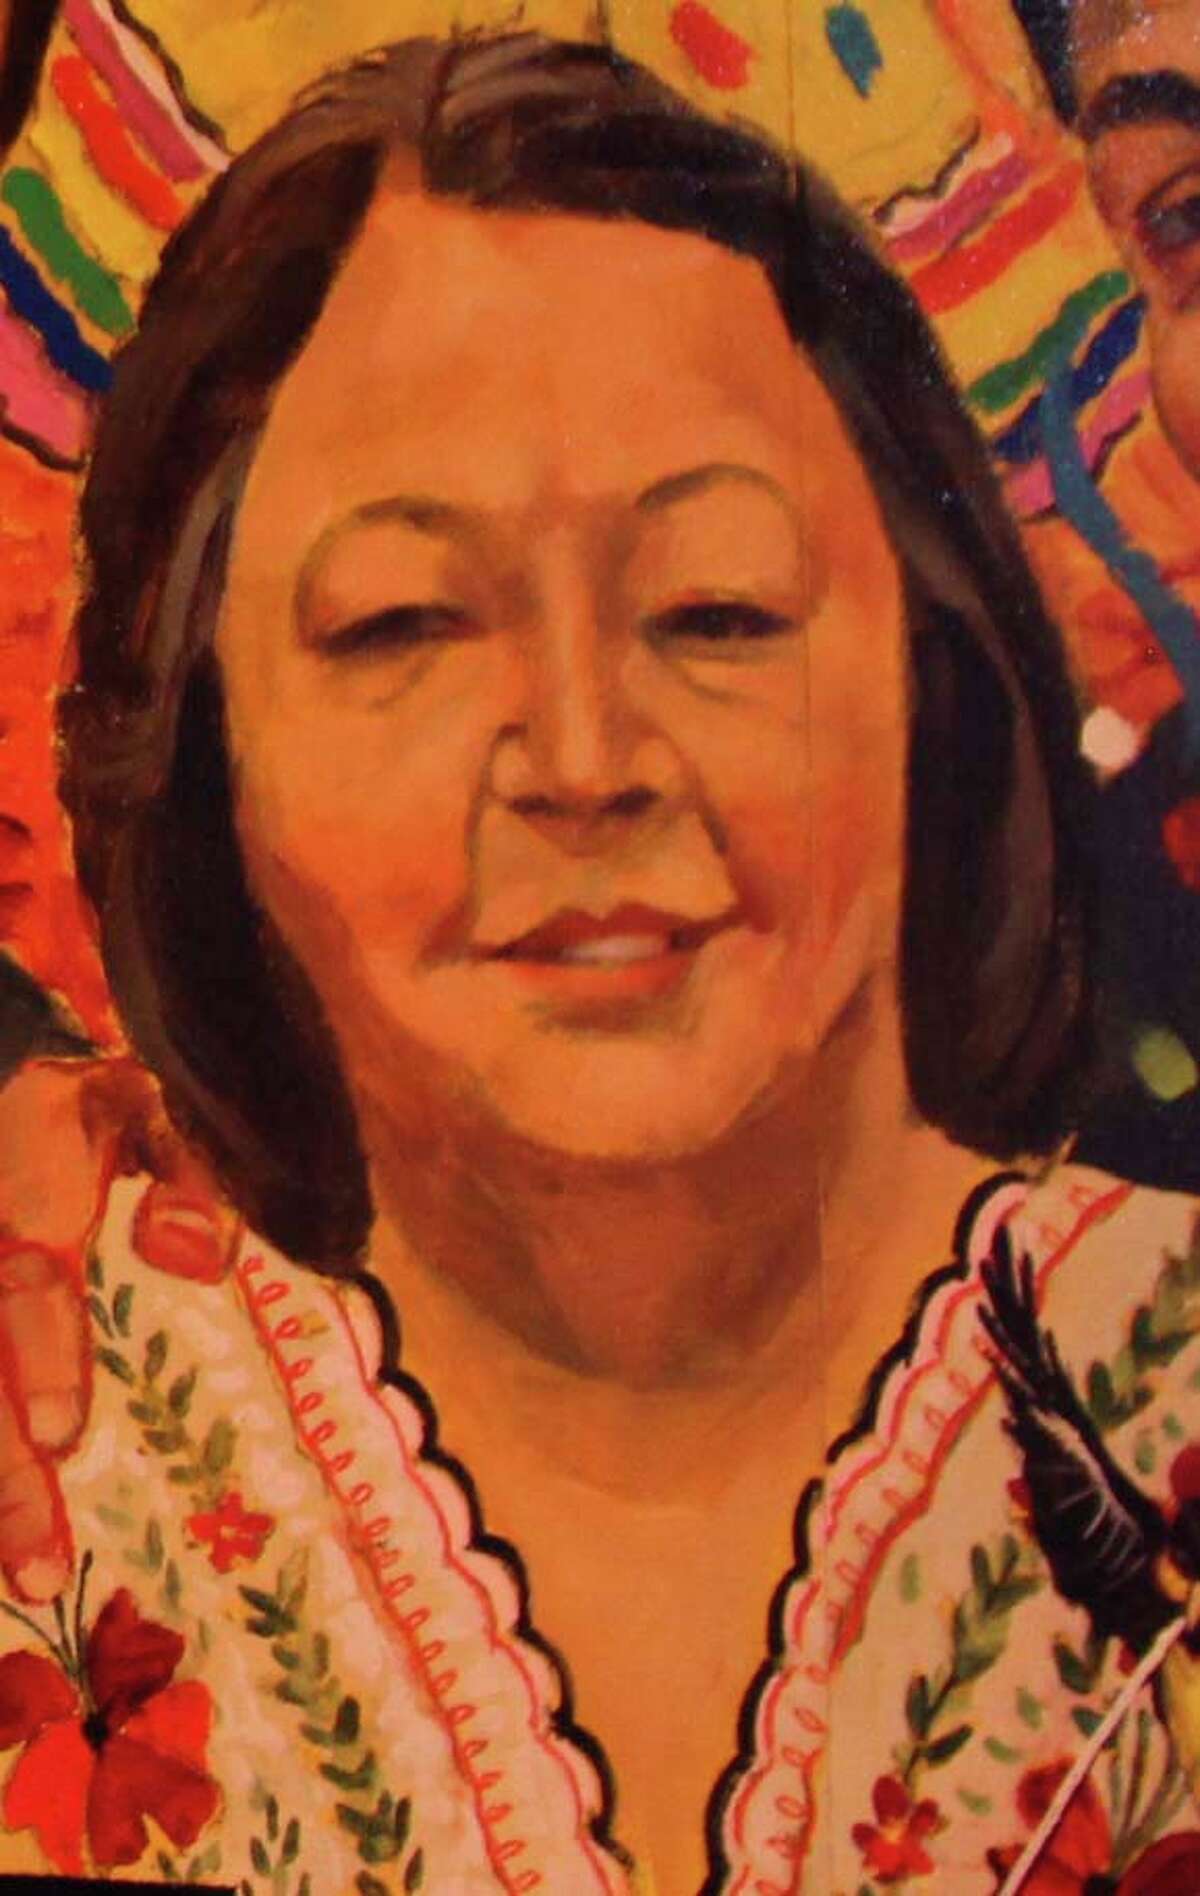 Rosie Castro While she is best known as the matriarch of San Antonio's prominent Castro family, she is also a political and civil rights activist, an educator, a community servant and peace laureate. Now retired from Palo Alto College, where she last served as interim dean of student success, she's involved in AARP, LatinasRepresent and the Texas Organizing Project.